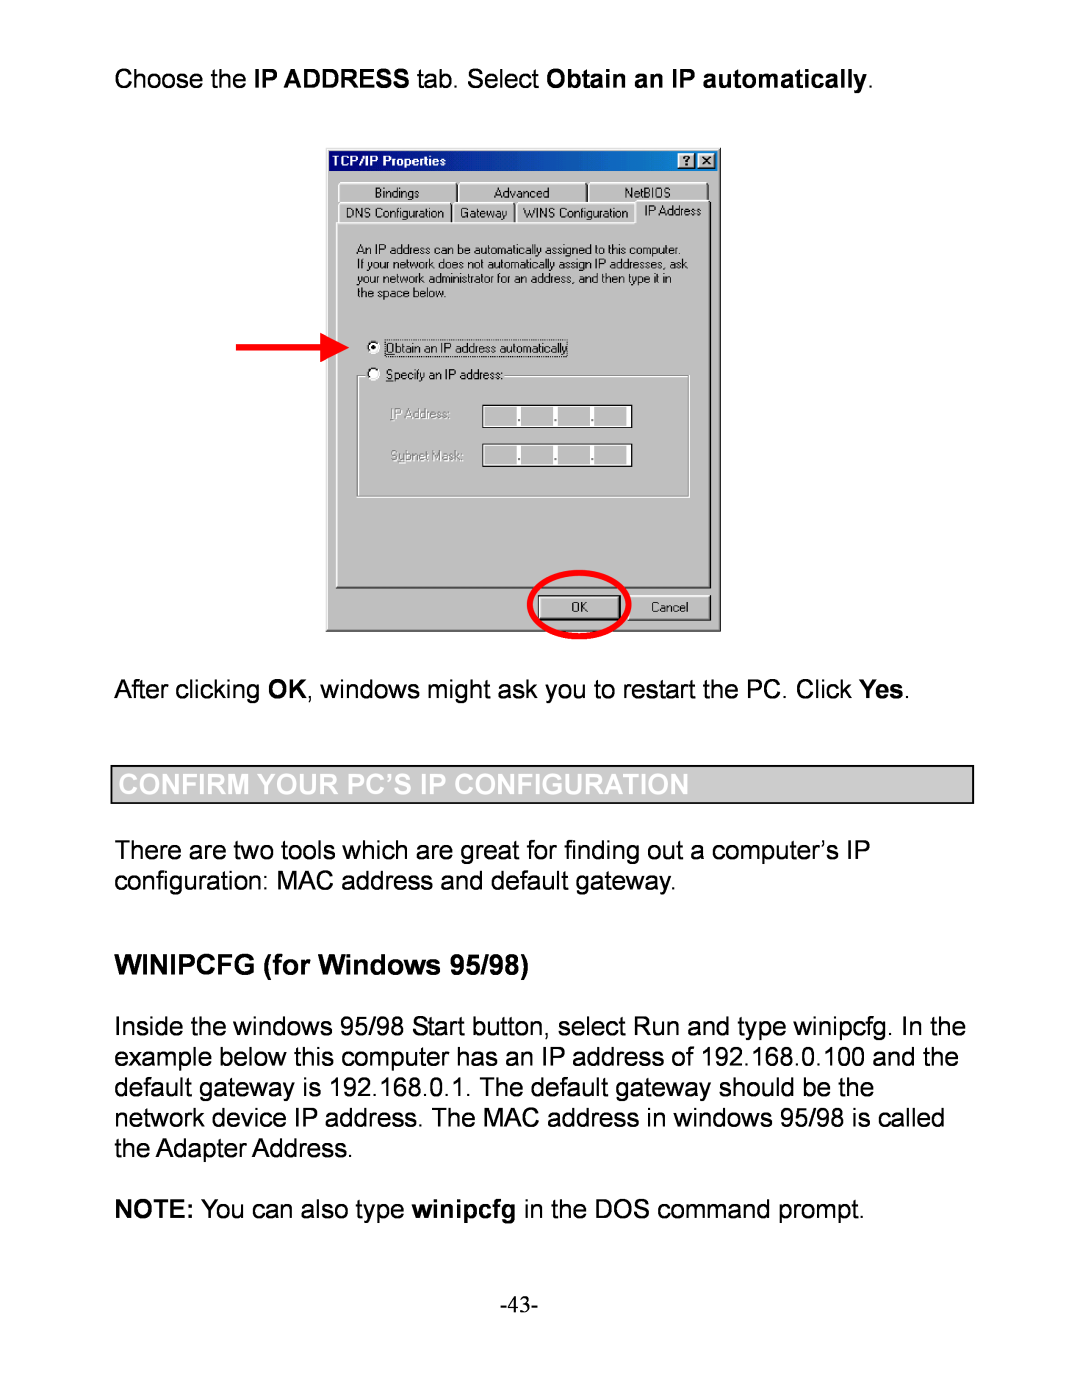 D-Link DI-604 manual WINIPCFG for Windows 95/98, Confirm Your Pc’S Ip Configuration 